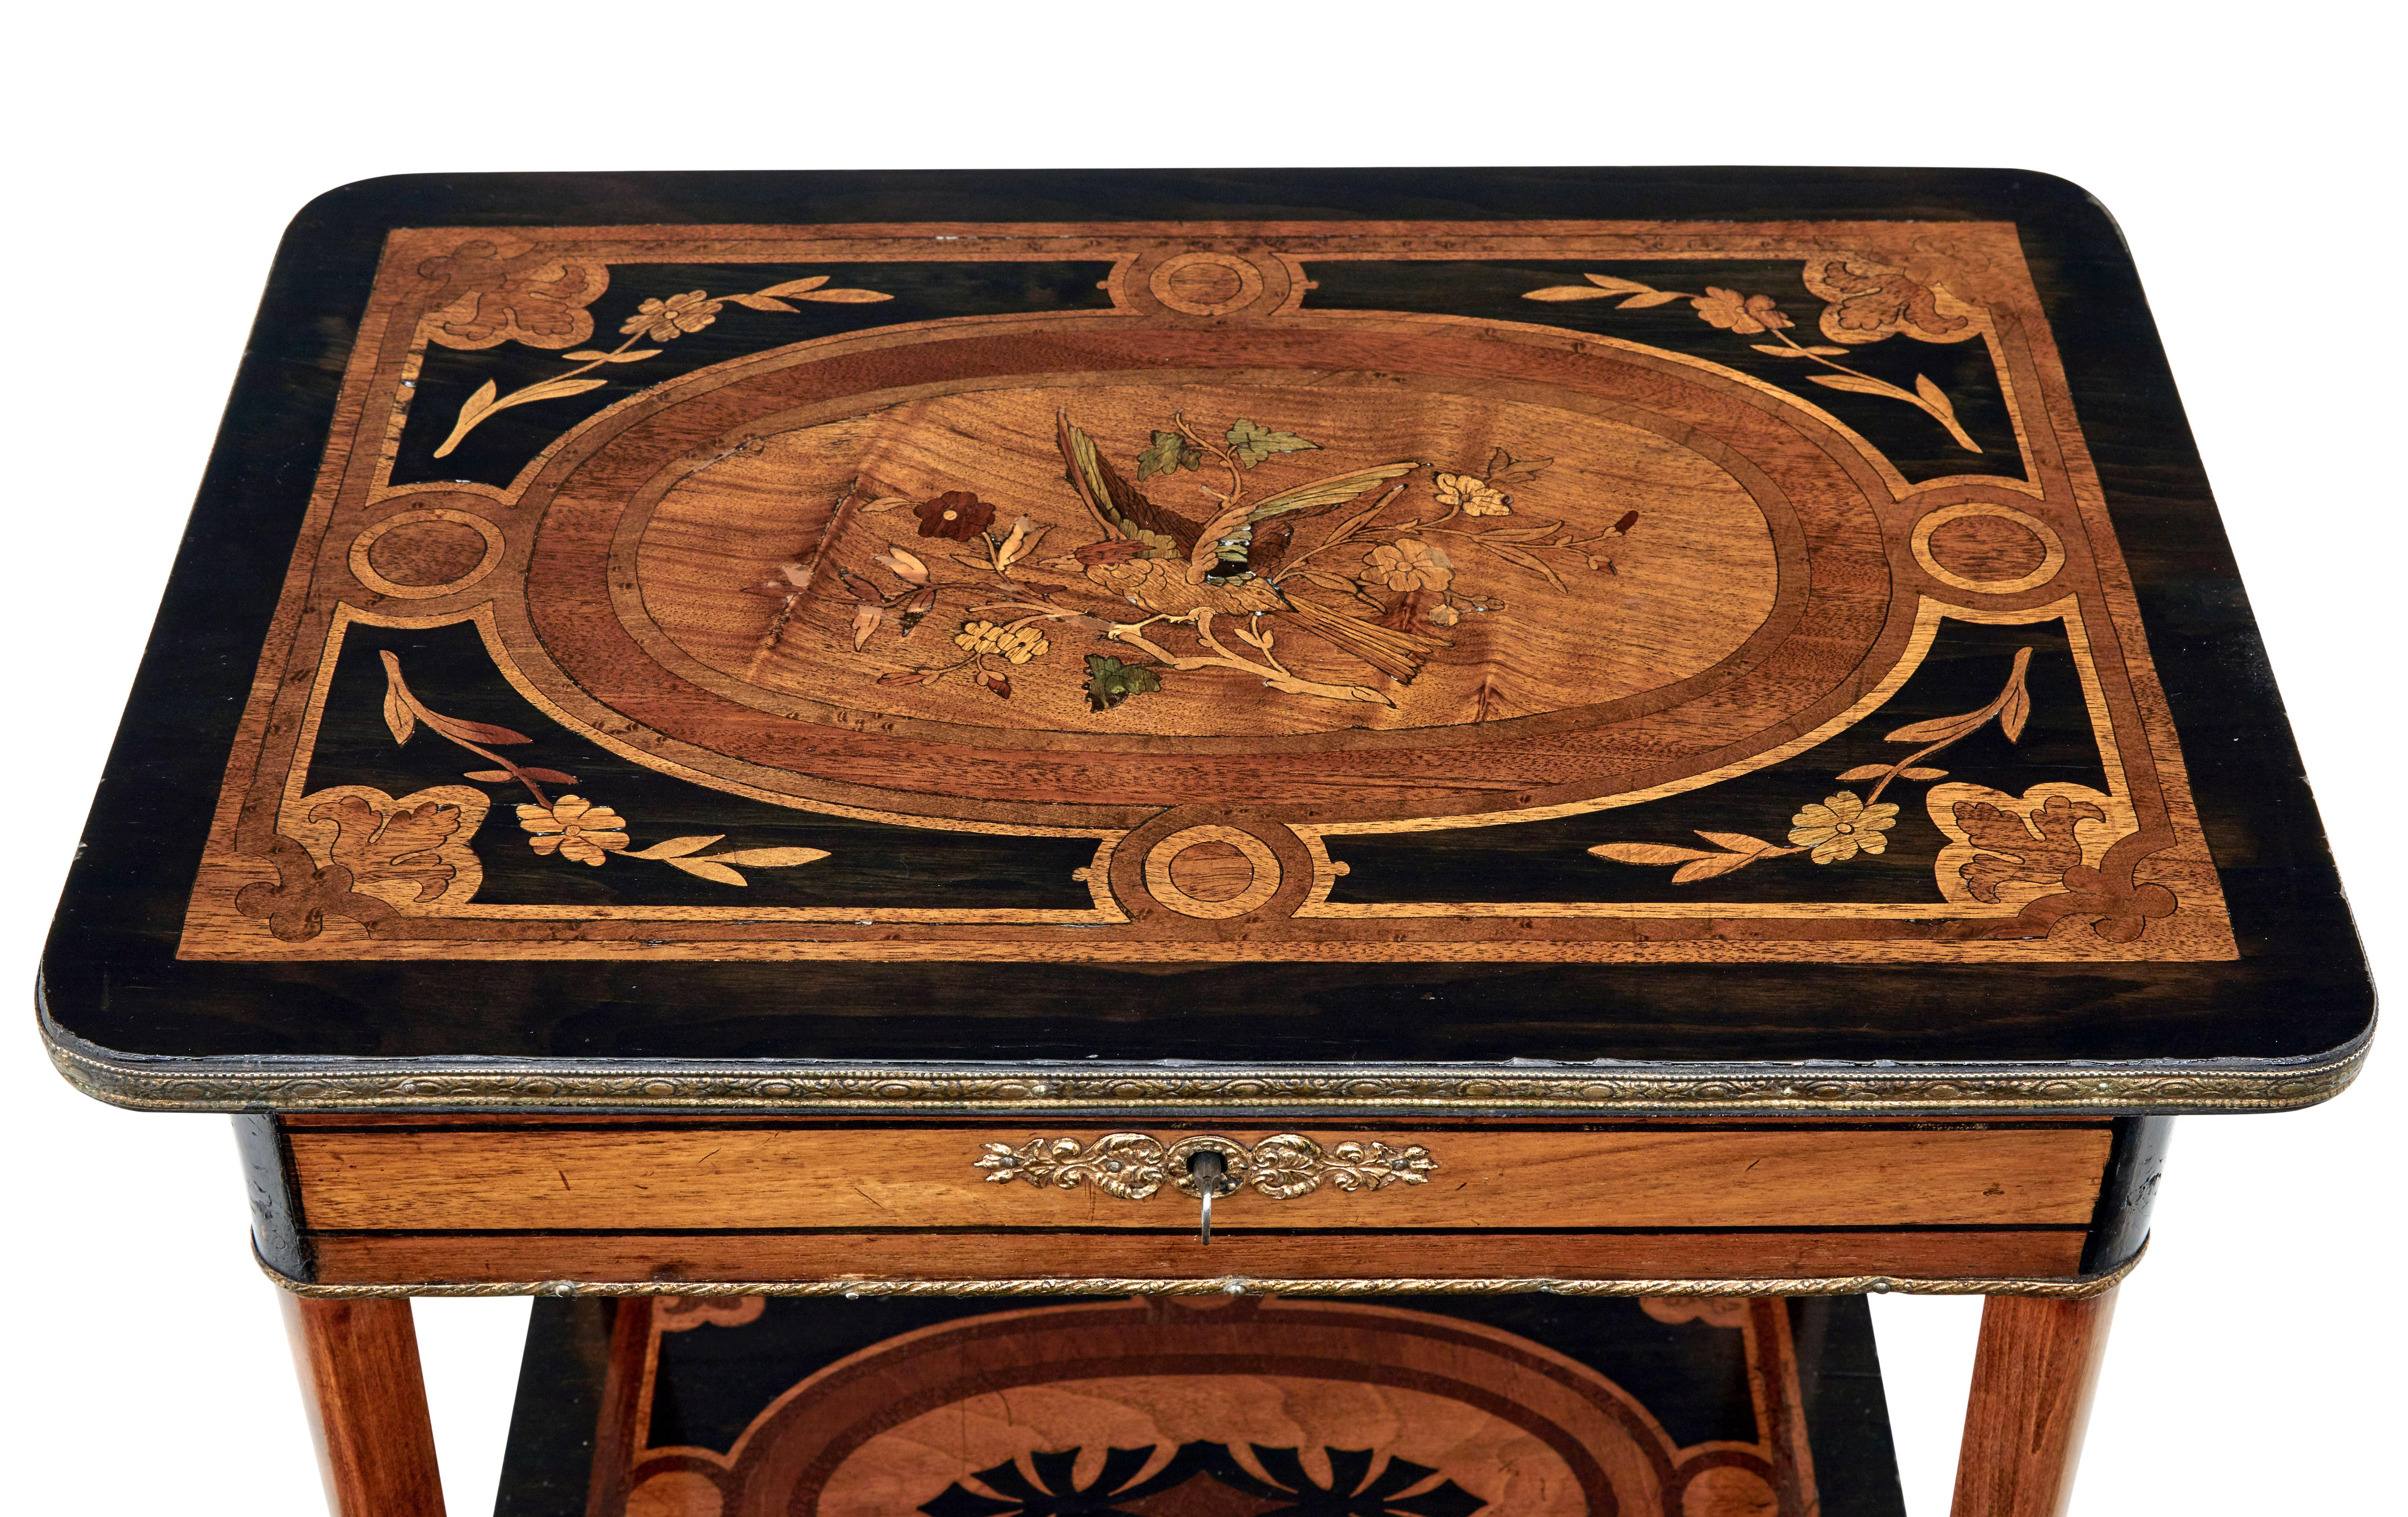 19th century mahogany inlaid ladies work table, circa 1880.

Beautiful multiple wood inlaid top depicting a bird amoung a branch and florals.  Ebonised with borders and swags.  Top opens to reveal a fitted interior with partitions and polished